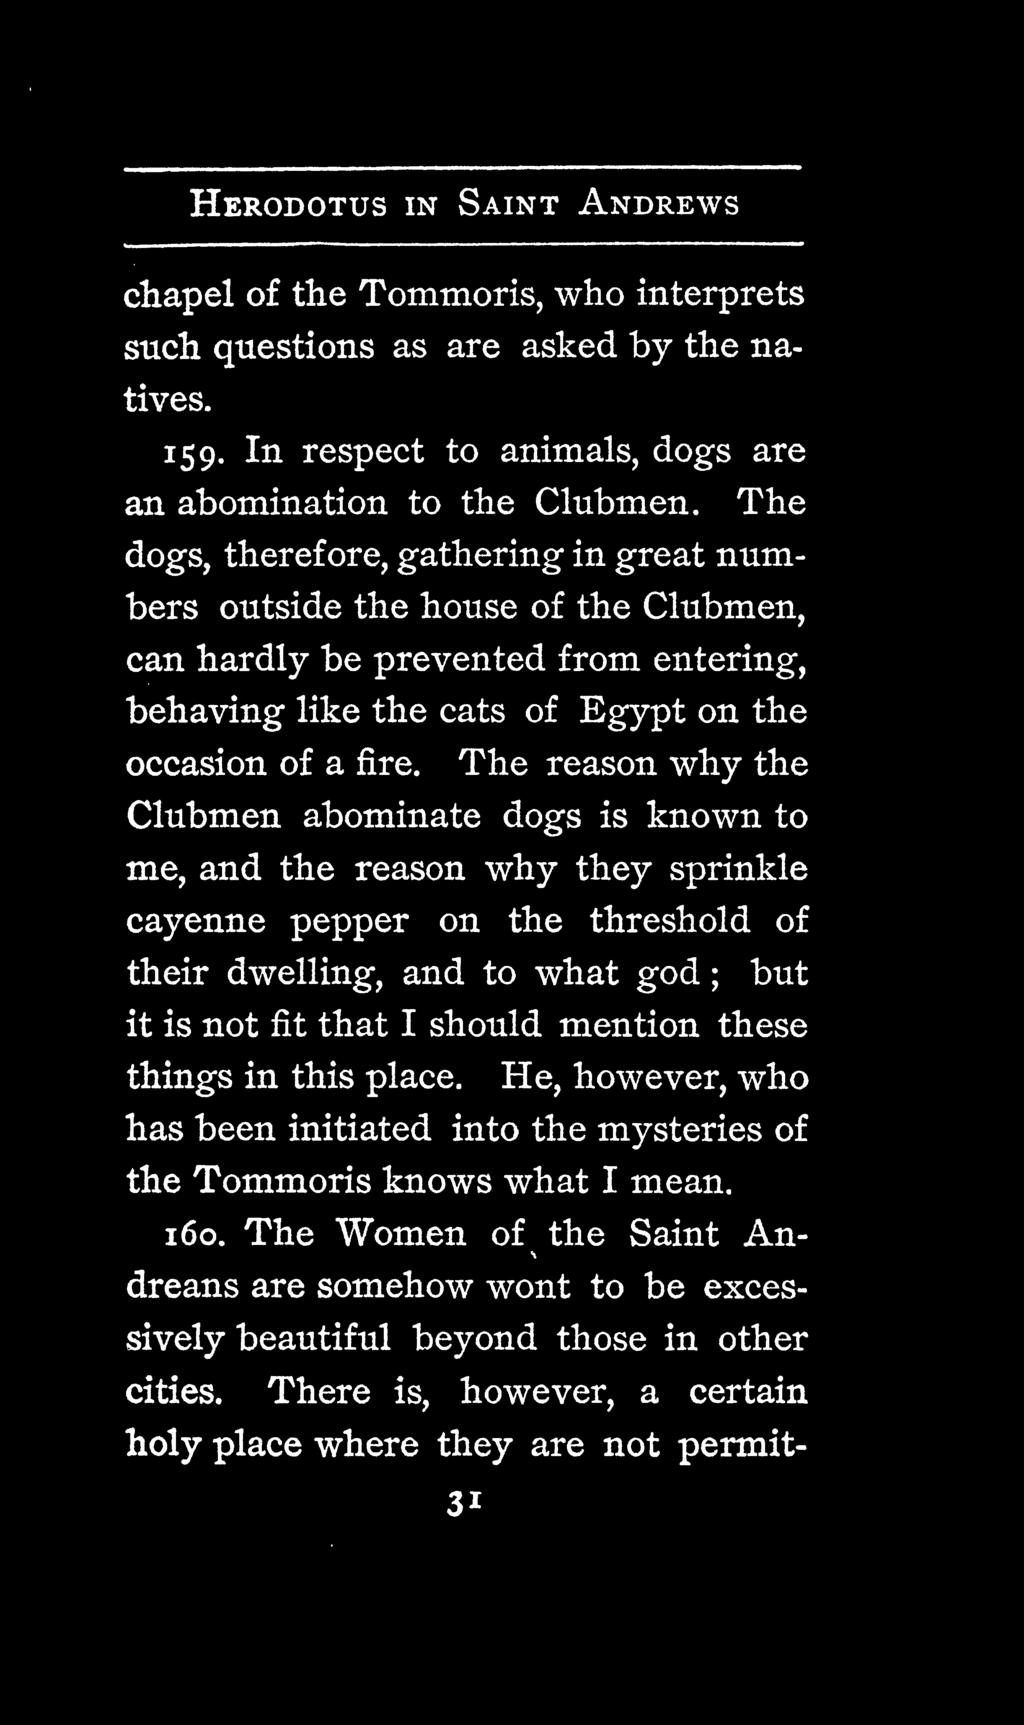 The reason why the Clubmen abominate dogs is known to me, and the reason why they sprinkle cayenne pepper on the threshold of their dwelling, and to what god ; but it is not fit that I should mention